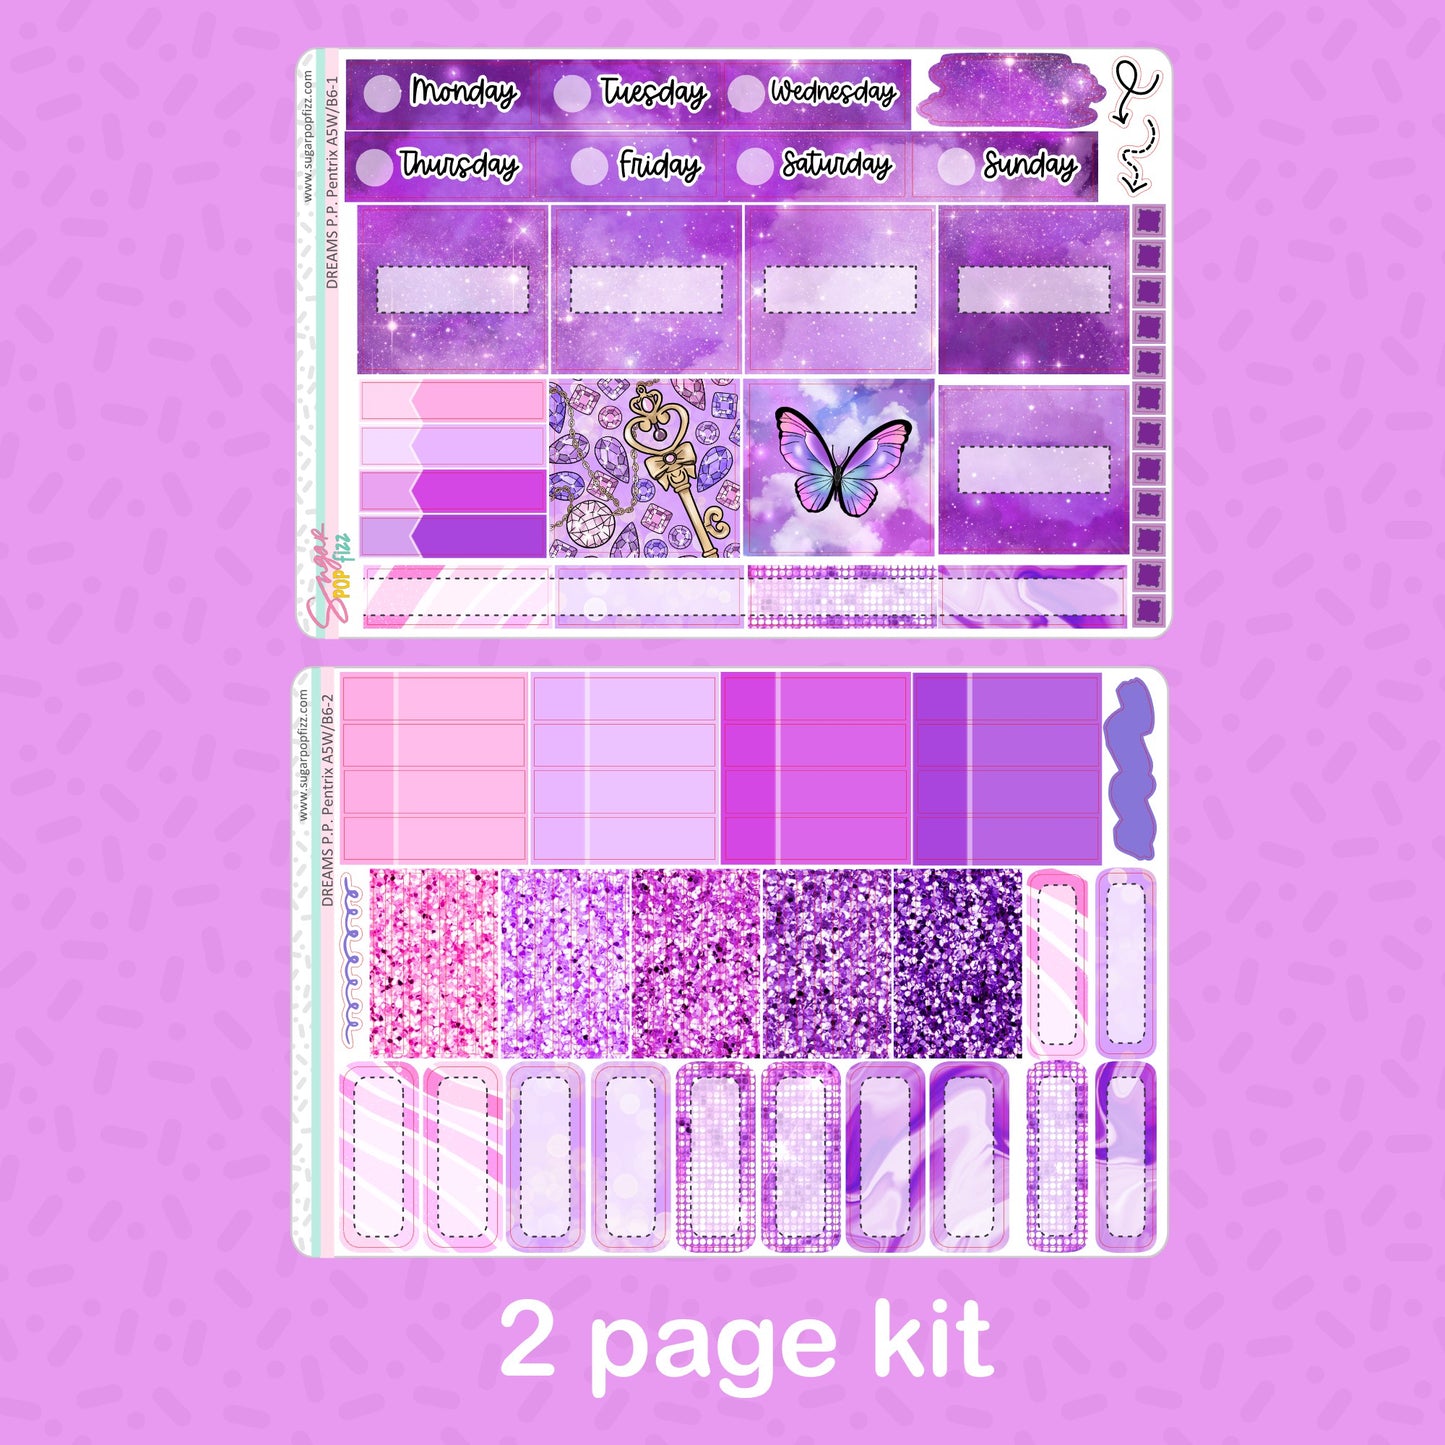 DREAMS - 3 Year Anniversary Penny Pages Pentrix Weekly Kit